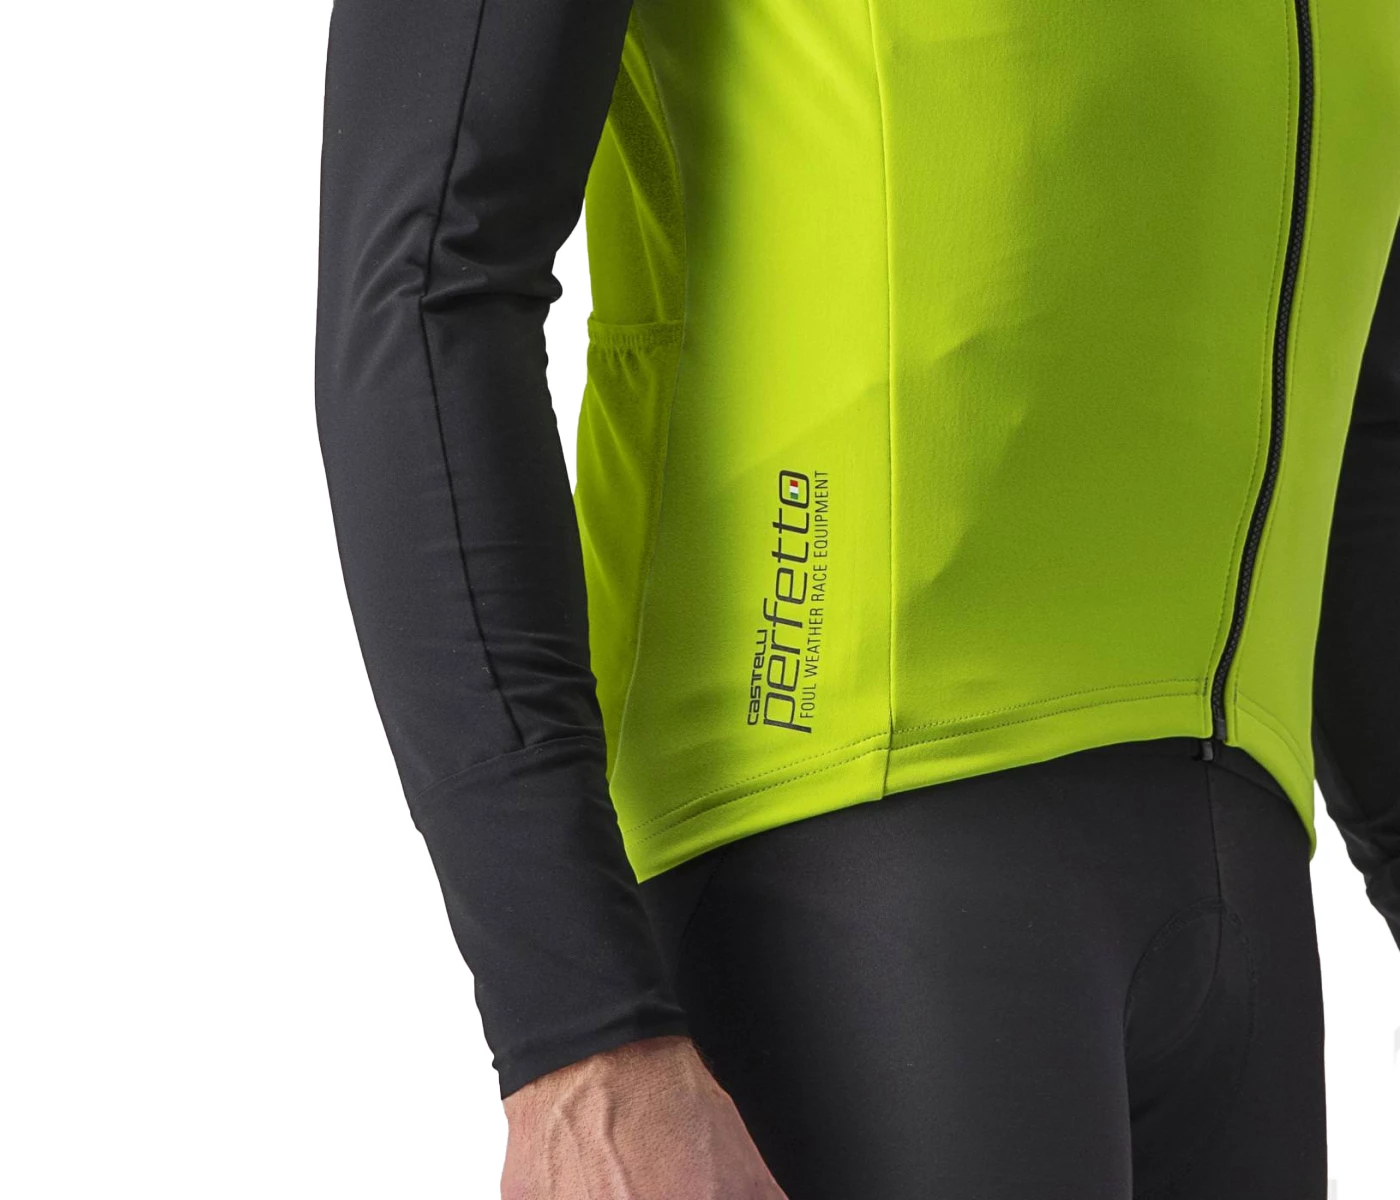 Castelli cycling vest Perfetto RoS 2